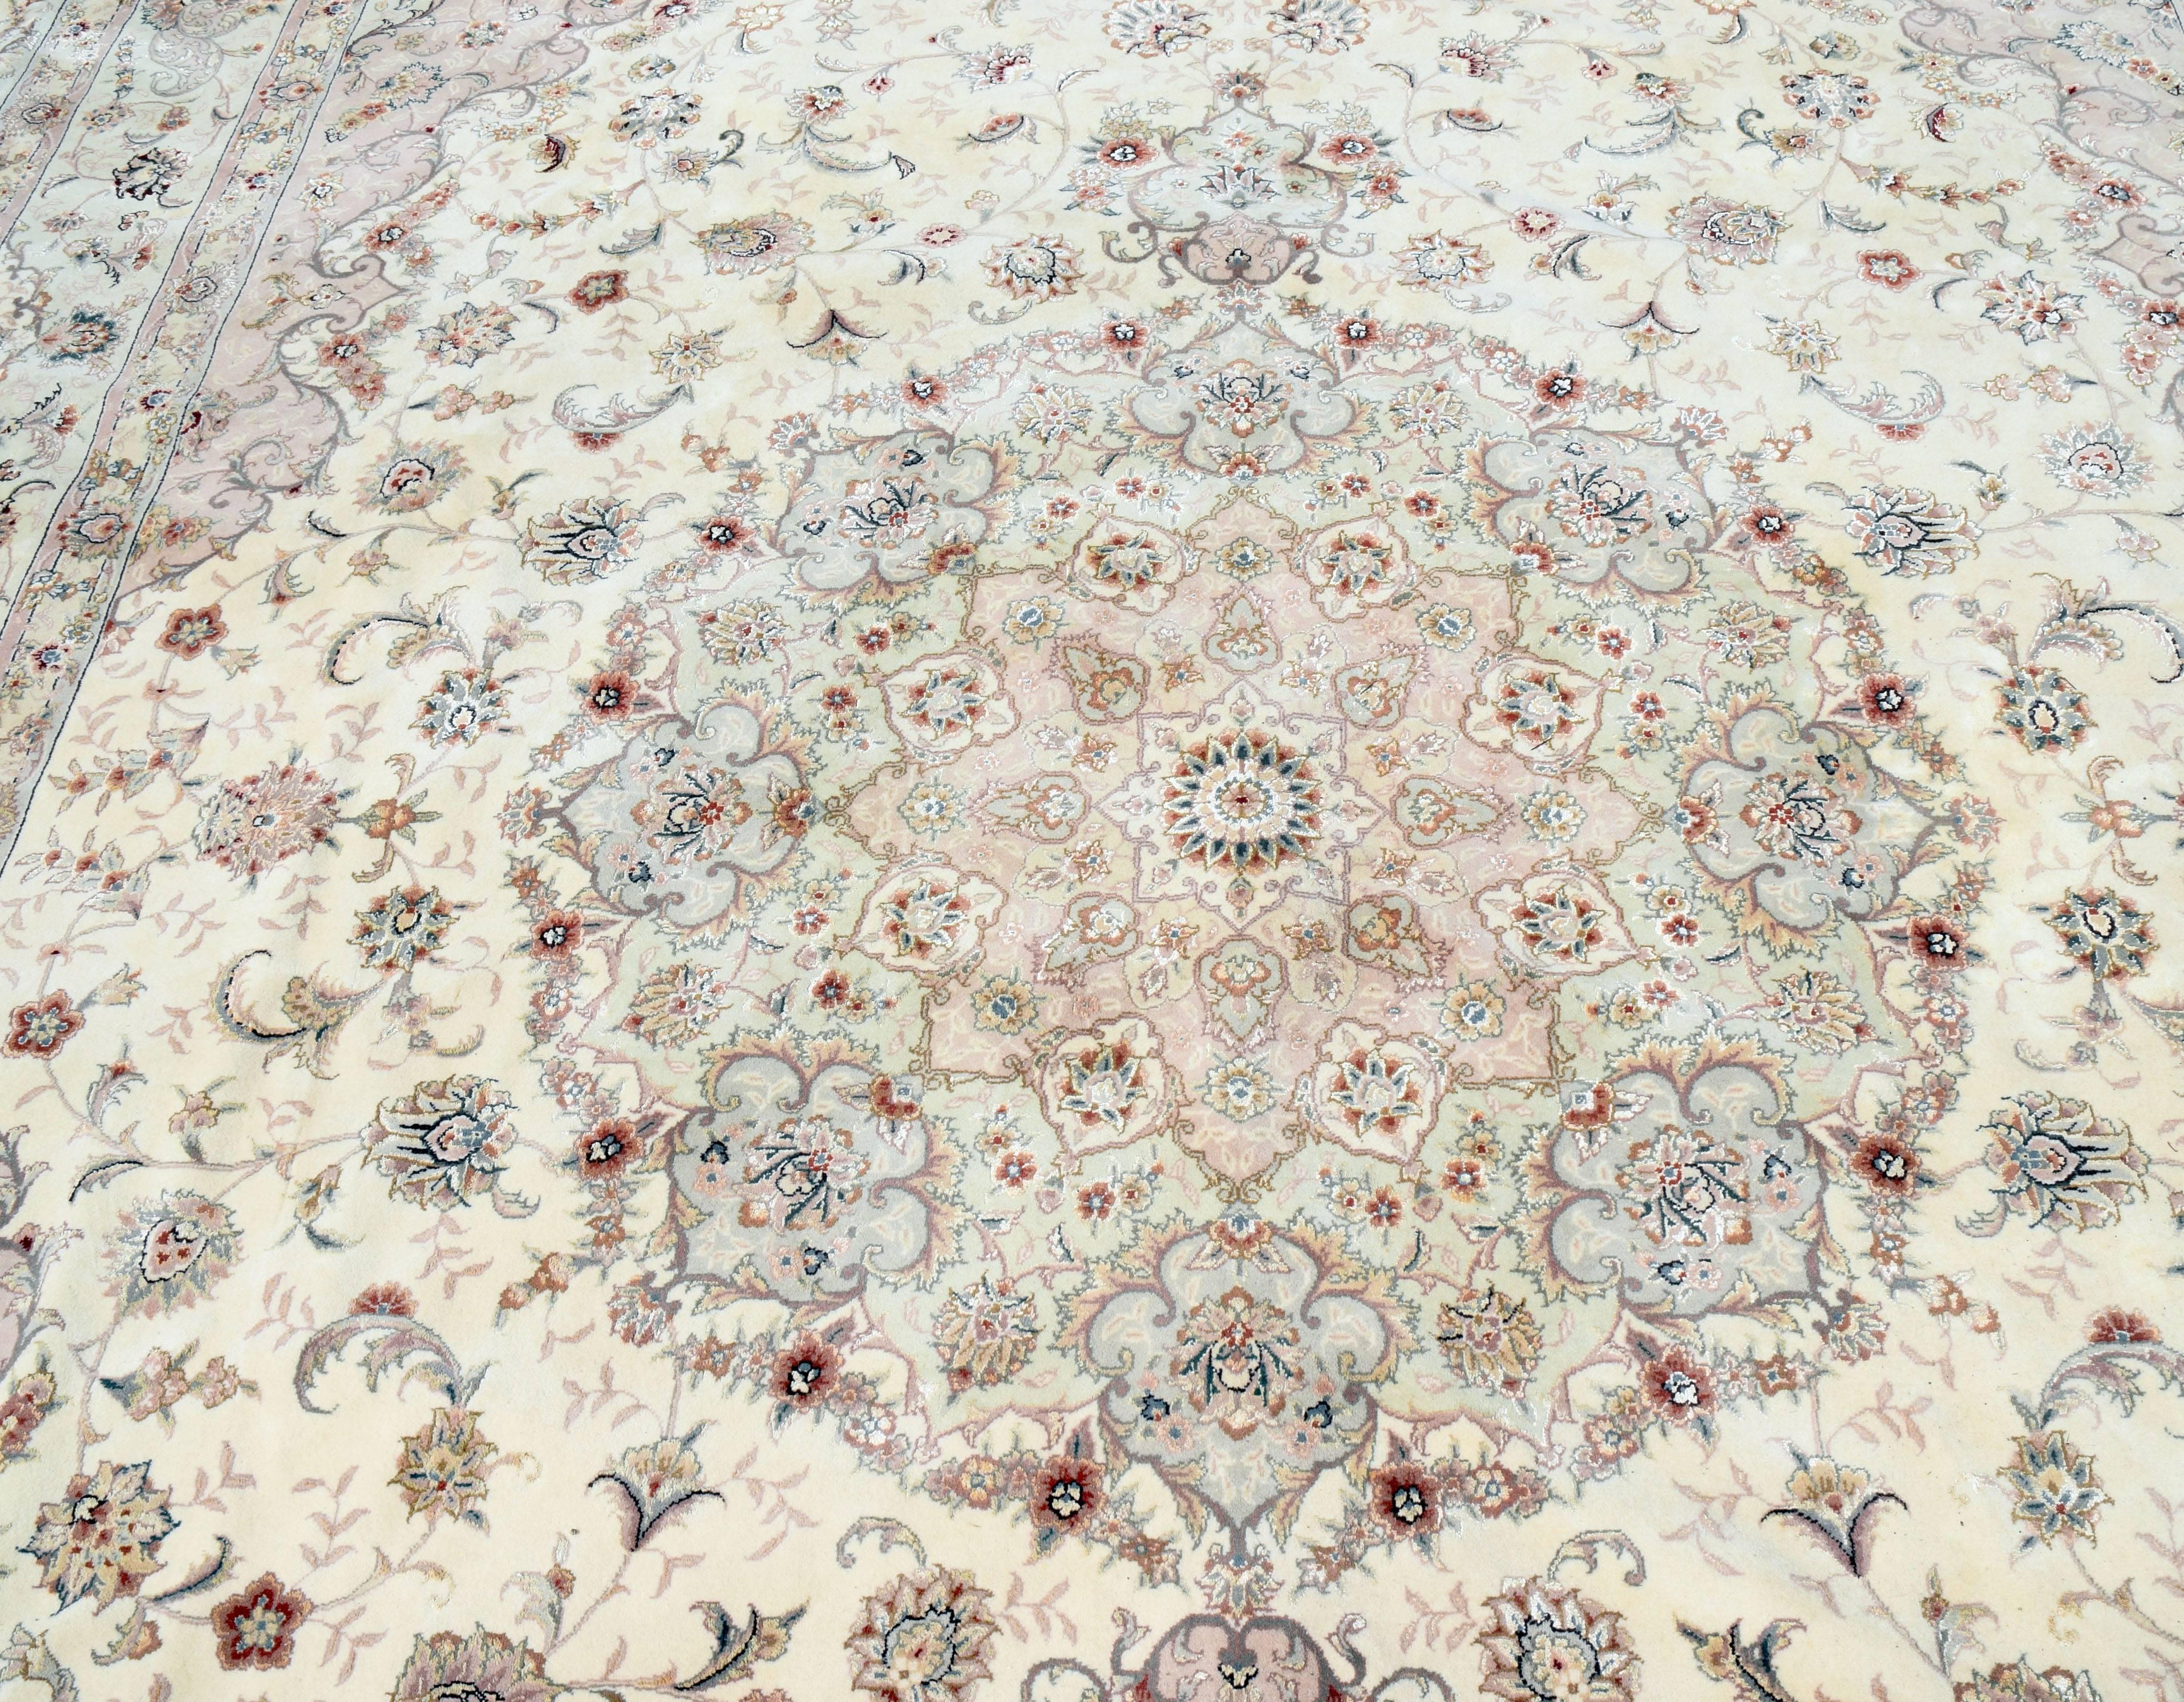 Beautiful wool rug with silk highlights by expert weavers from the Turkey/Pakistan/Turkmenistan region, circa 2000. High knot content and superior wool quality makes this is a very special rug. Pastel shades in champagne background and rose with